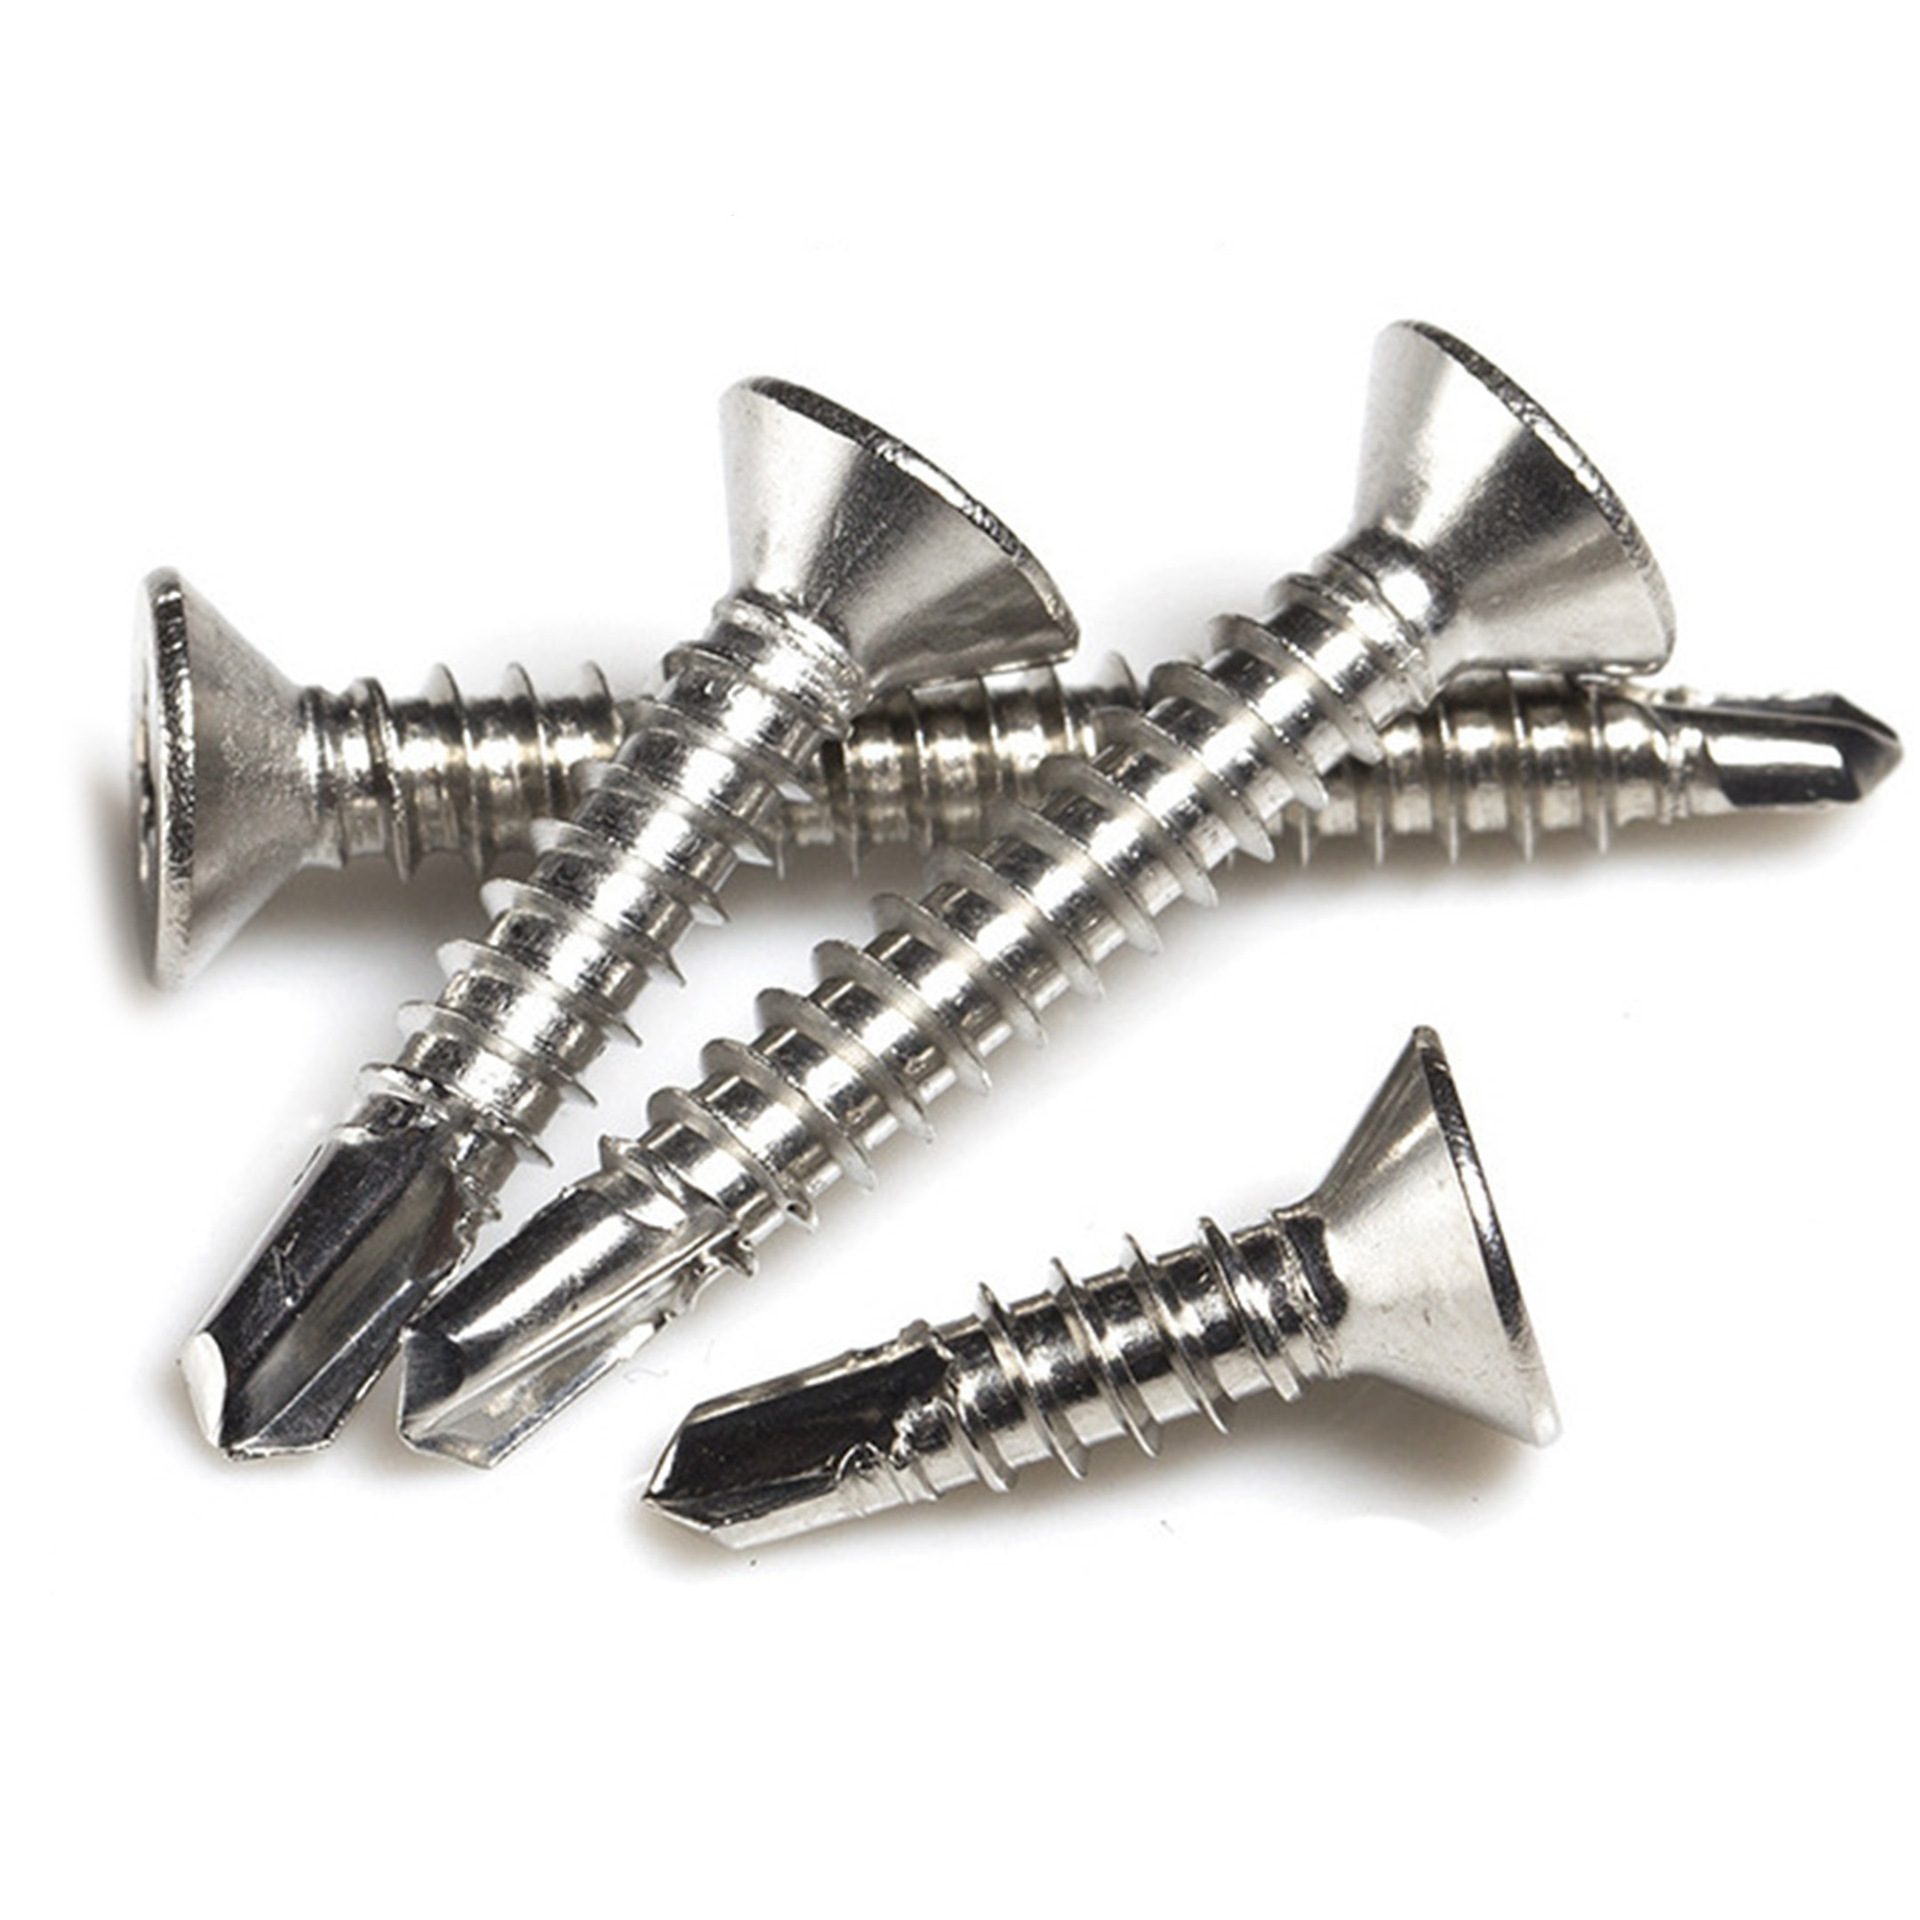 M3.5 304 Stainless Steel Phillips Flat Head Drilling Self-Tapping Screws